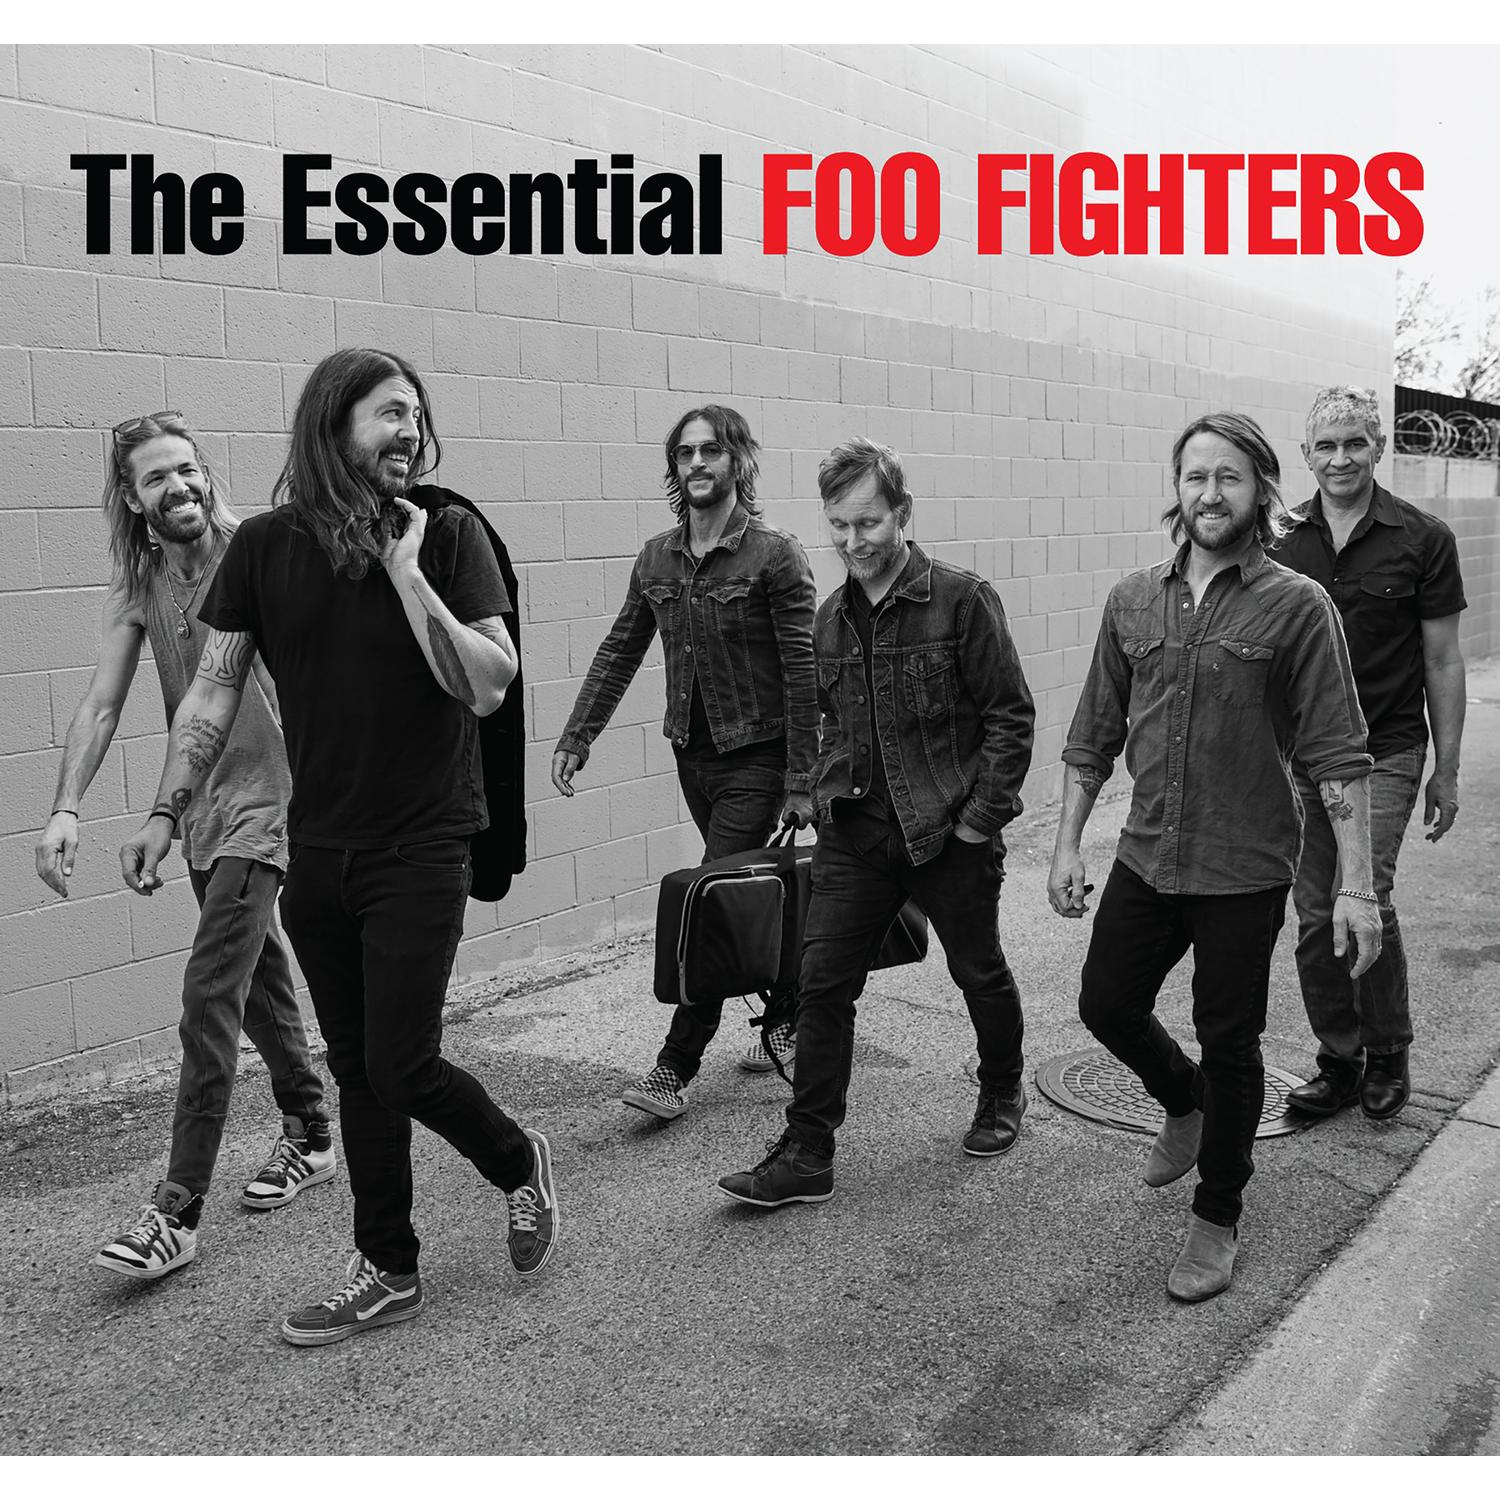 THE ESSENTIAL FOO FIGHTERS